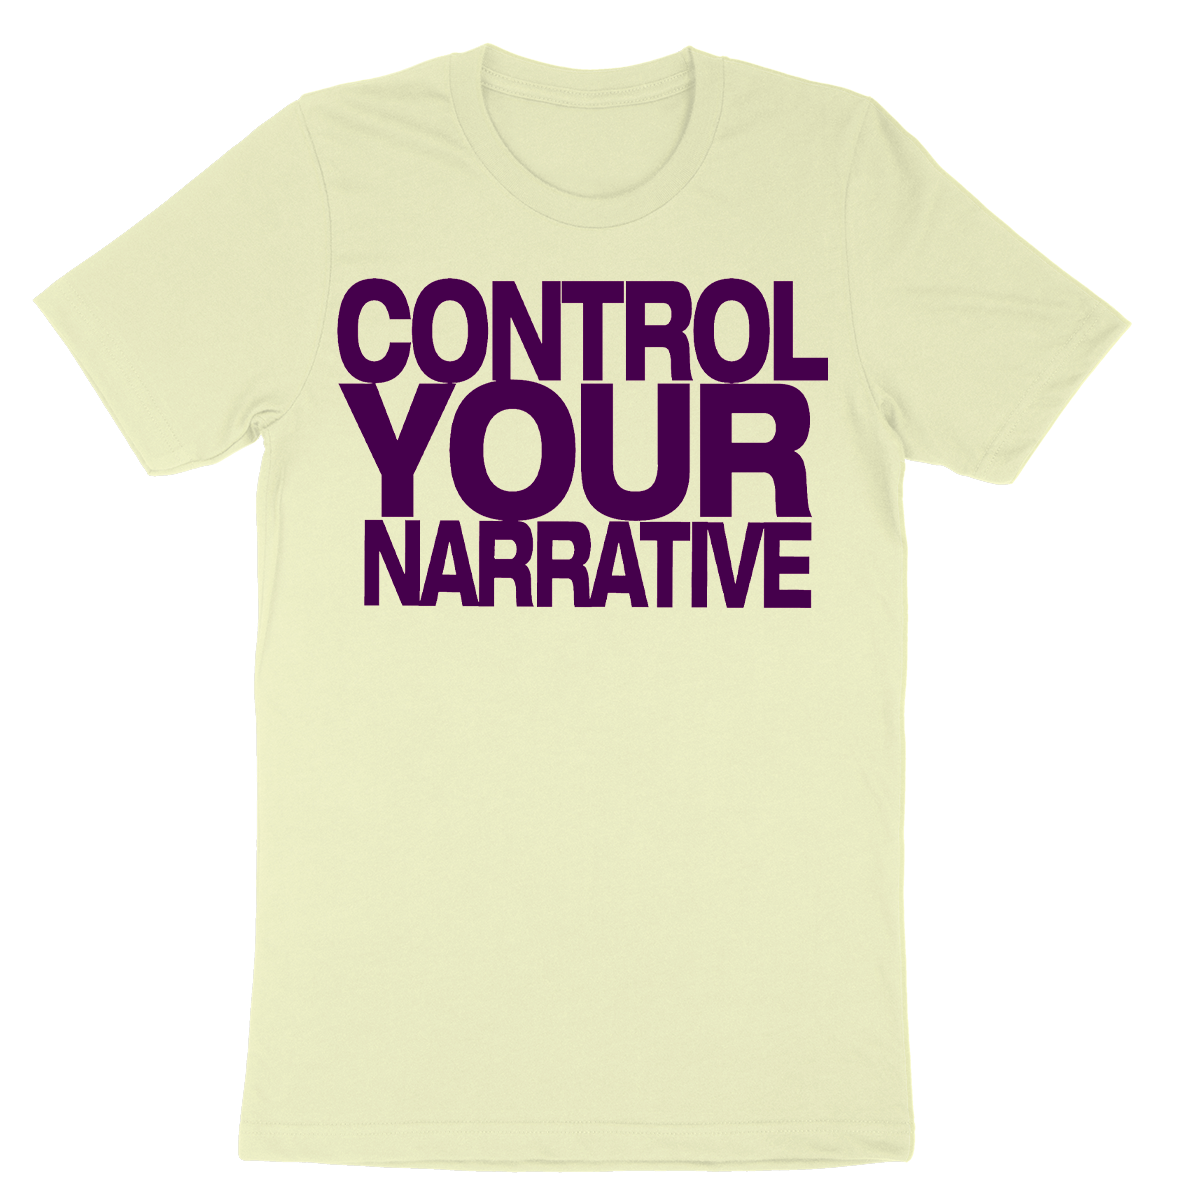 CONTROL YOUR NARRATIVE "VIBE" TEE